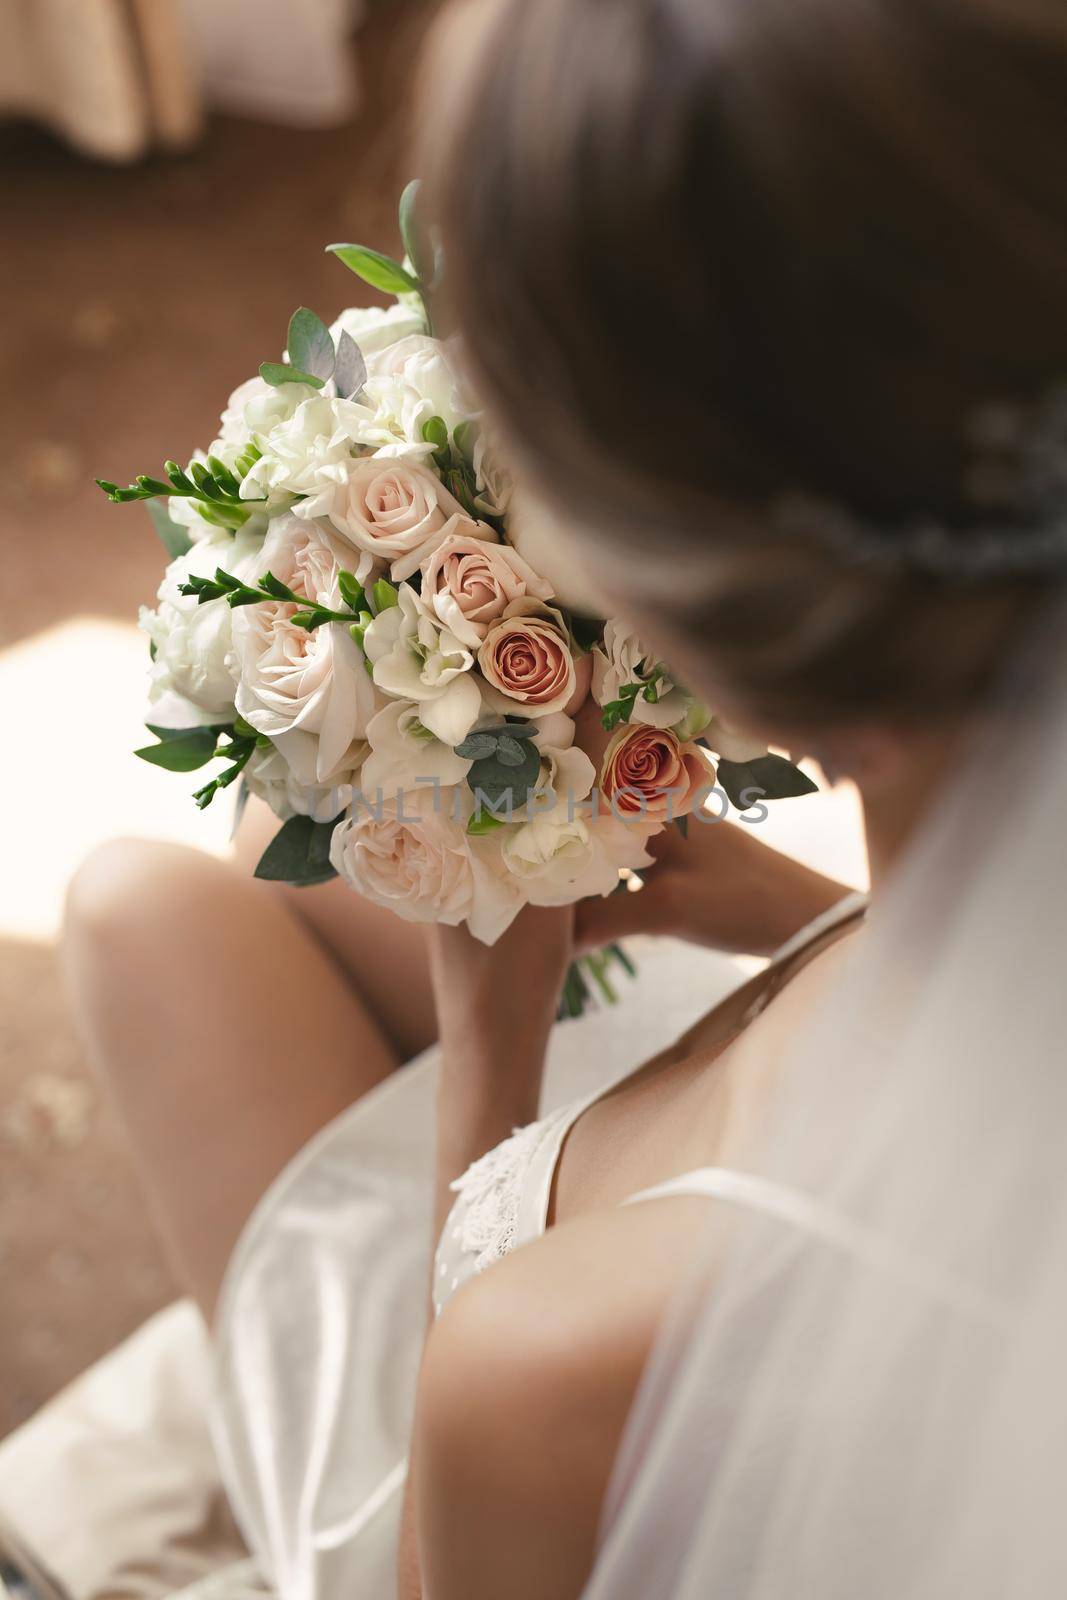 Luxury white wedding bouquet in the hands of the bride.